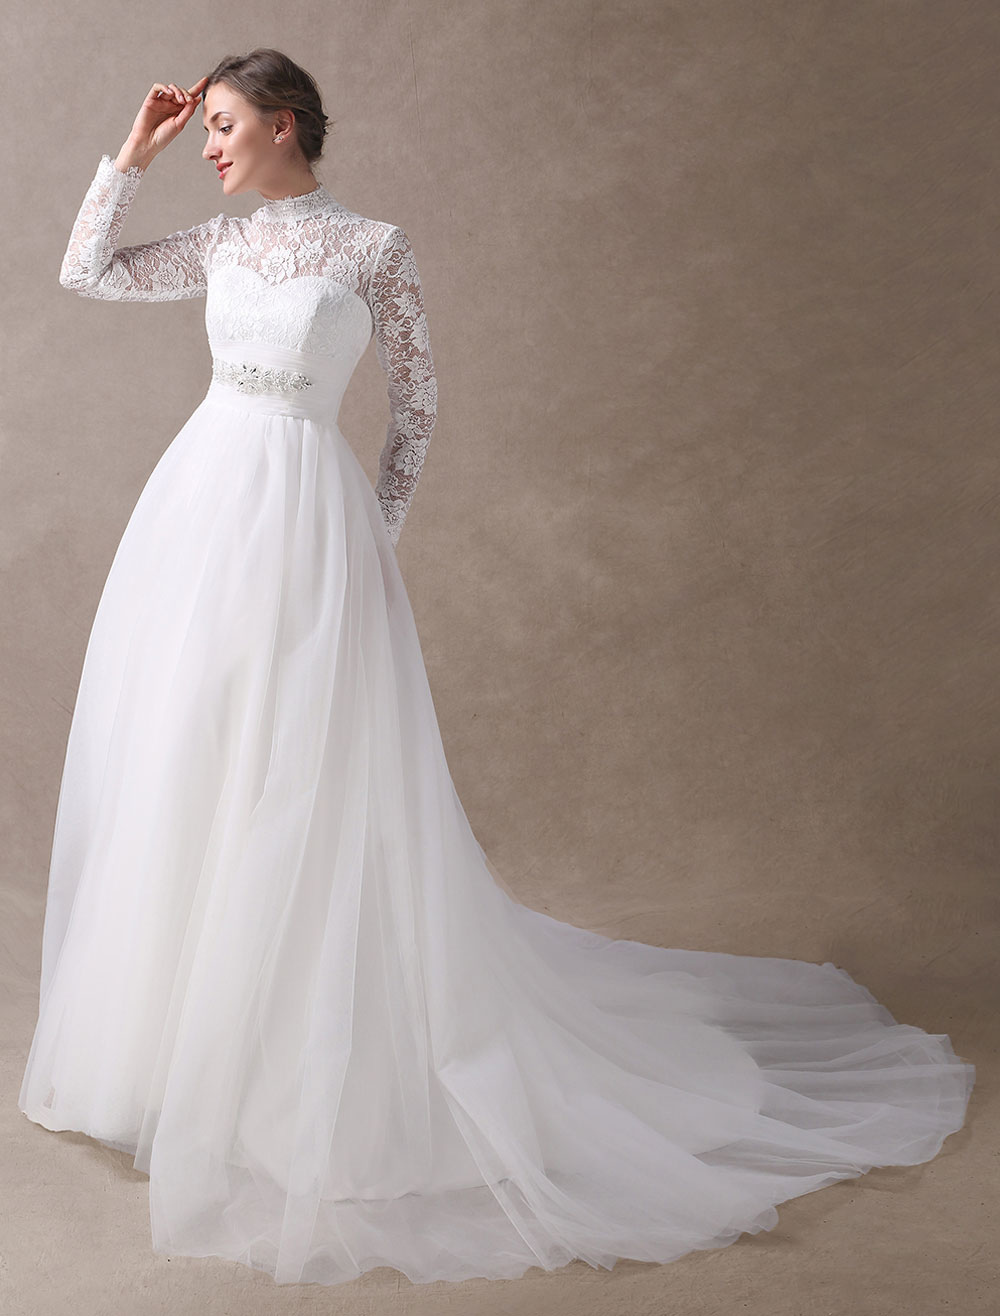 Gown Vintage Bridal Dress Lace Long Sleeve Beaded Sash High Collar Cutoff Illusion Retro Wedding Gowns With Train photo